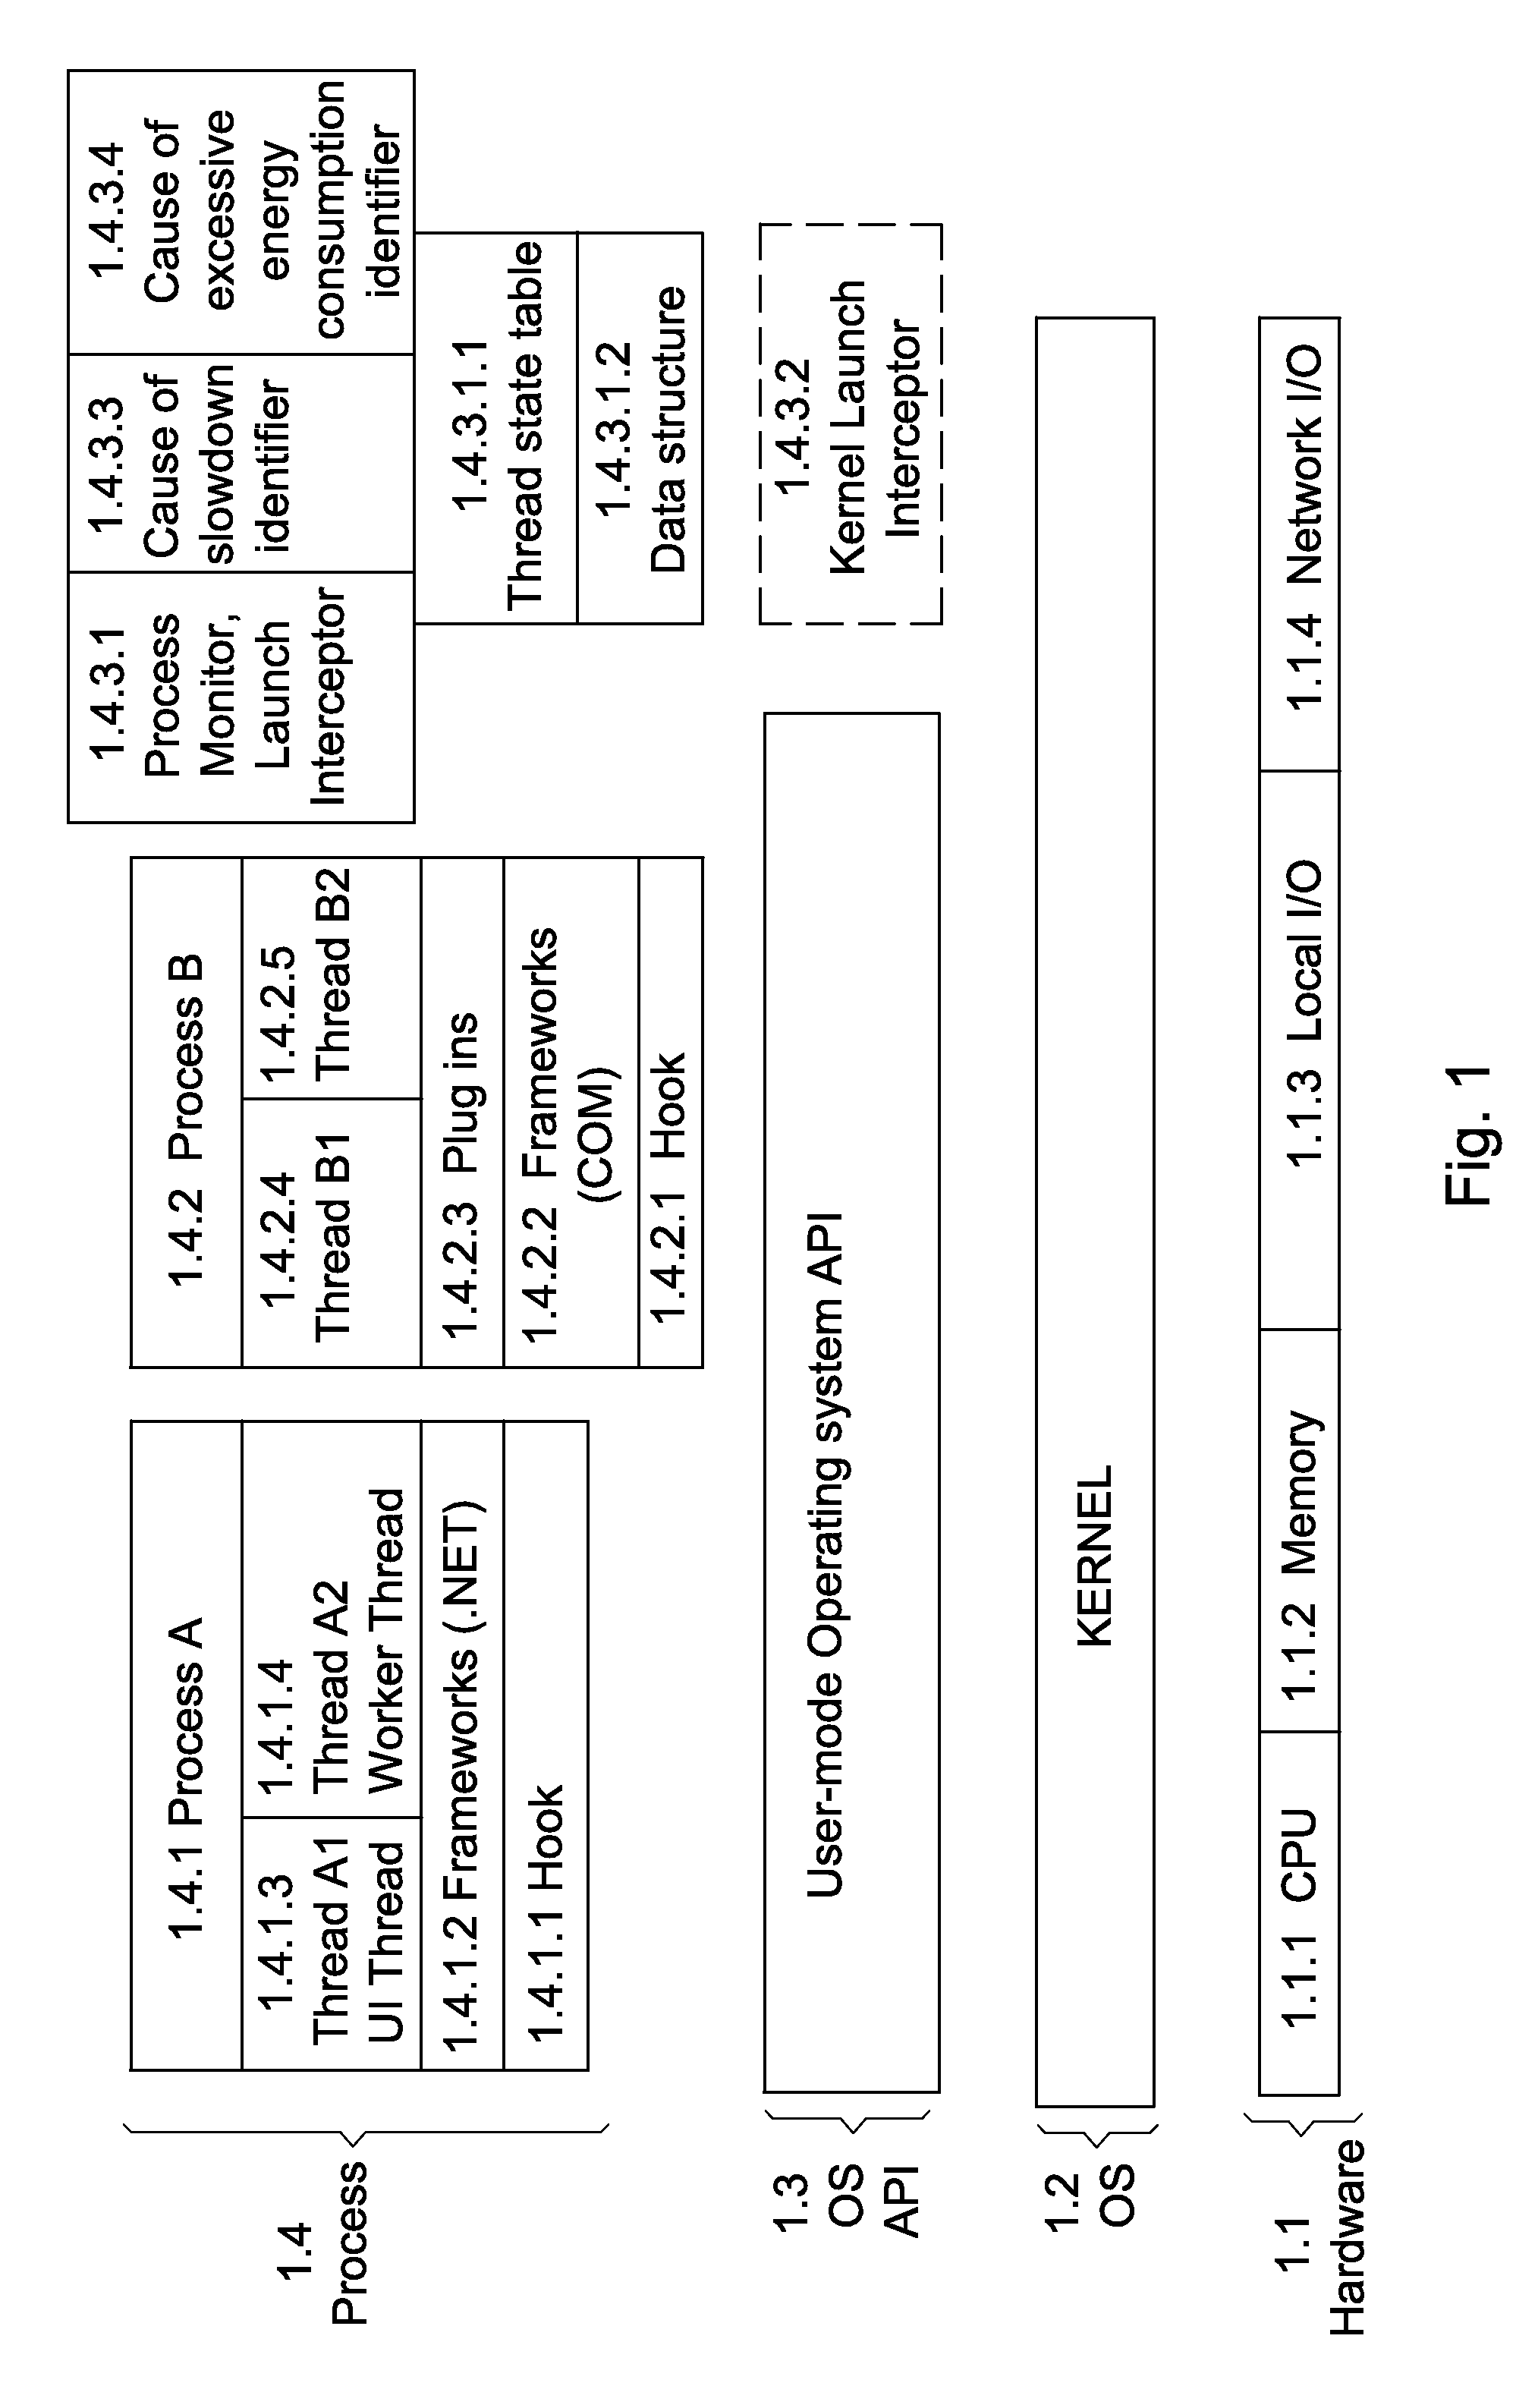 Real time monitoring of computer for determining speed and energy consumption of various processes